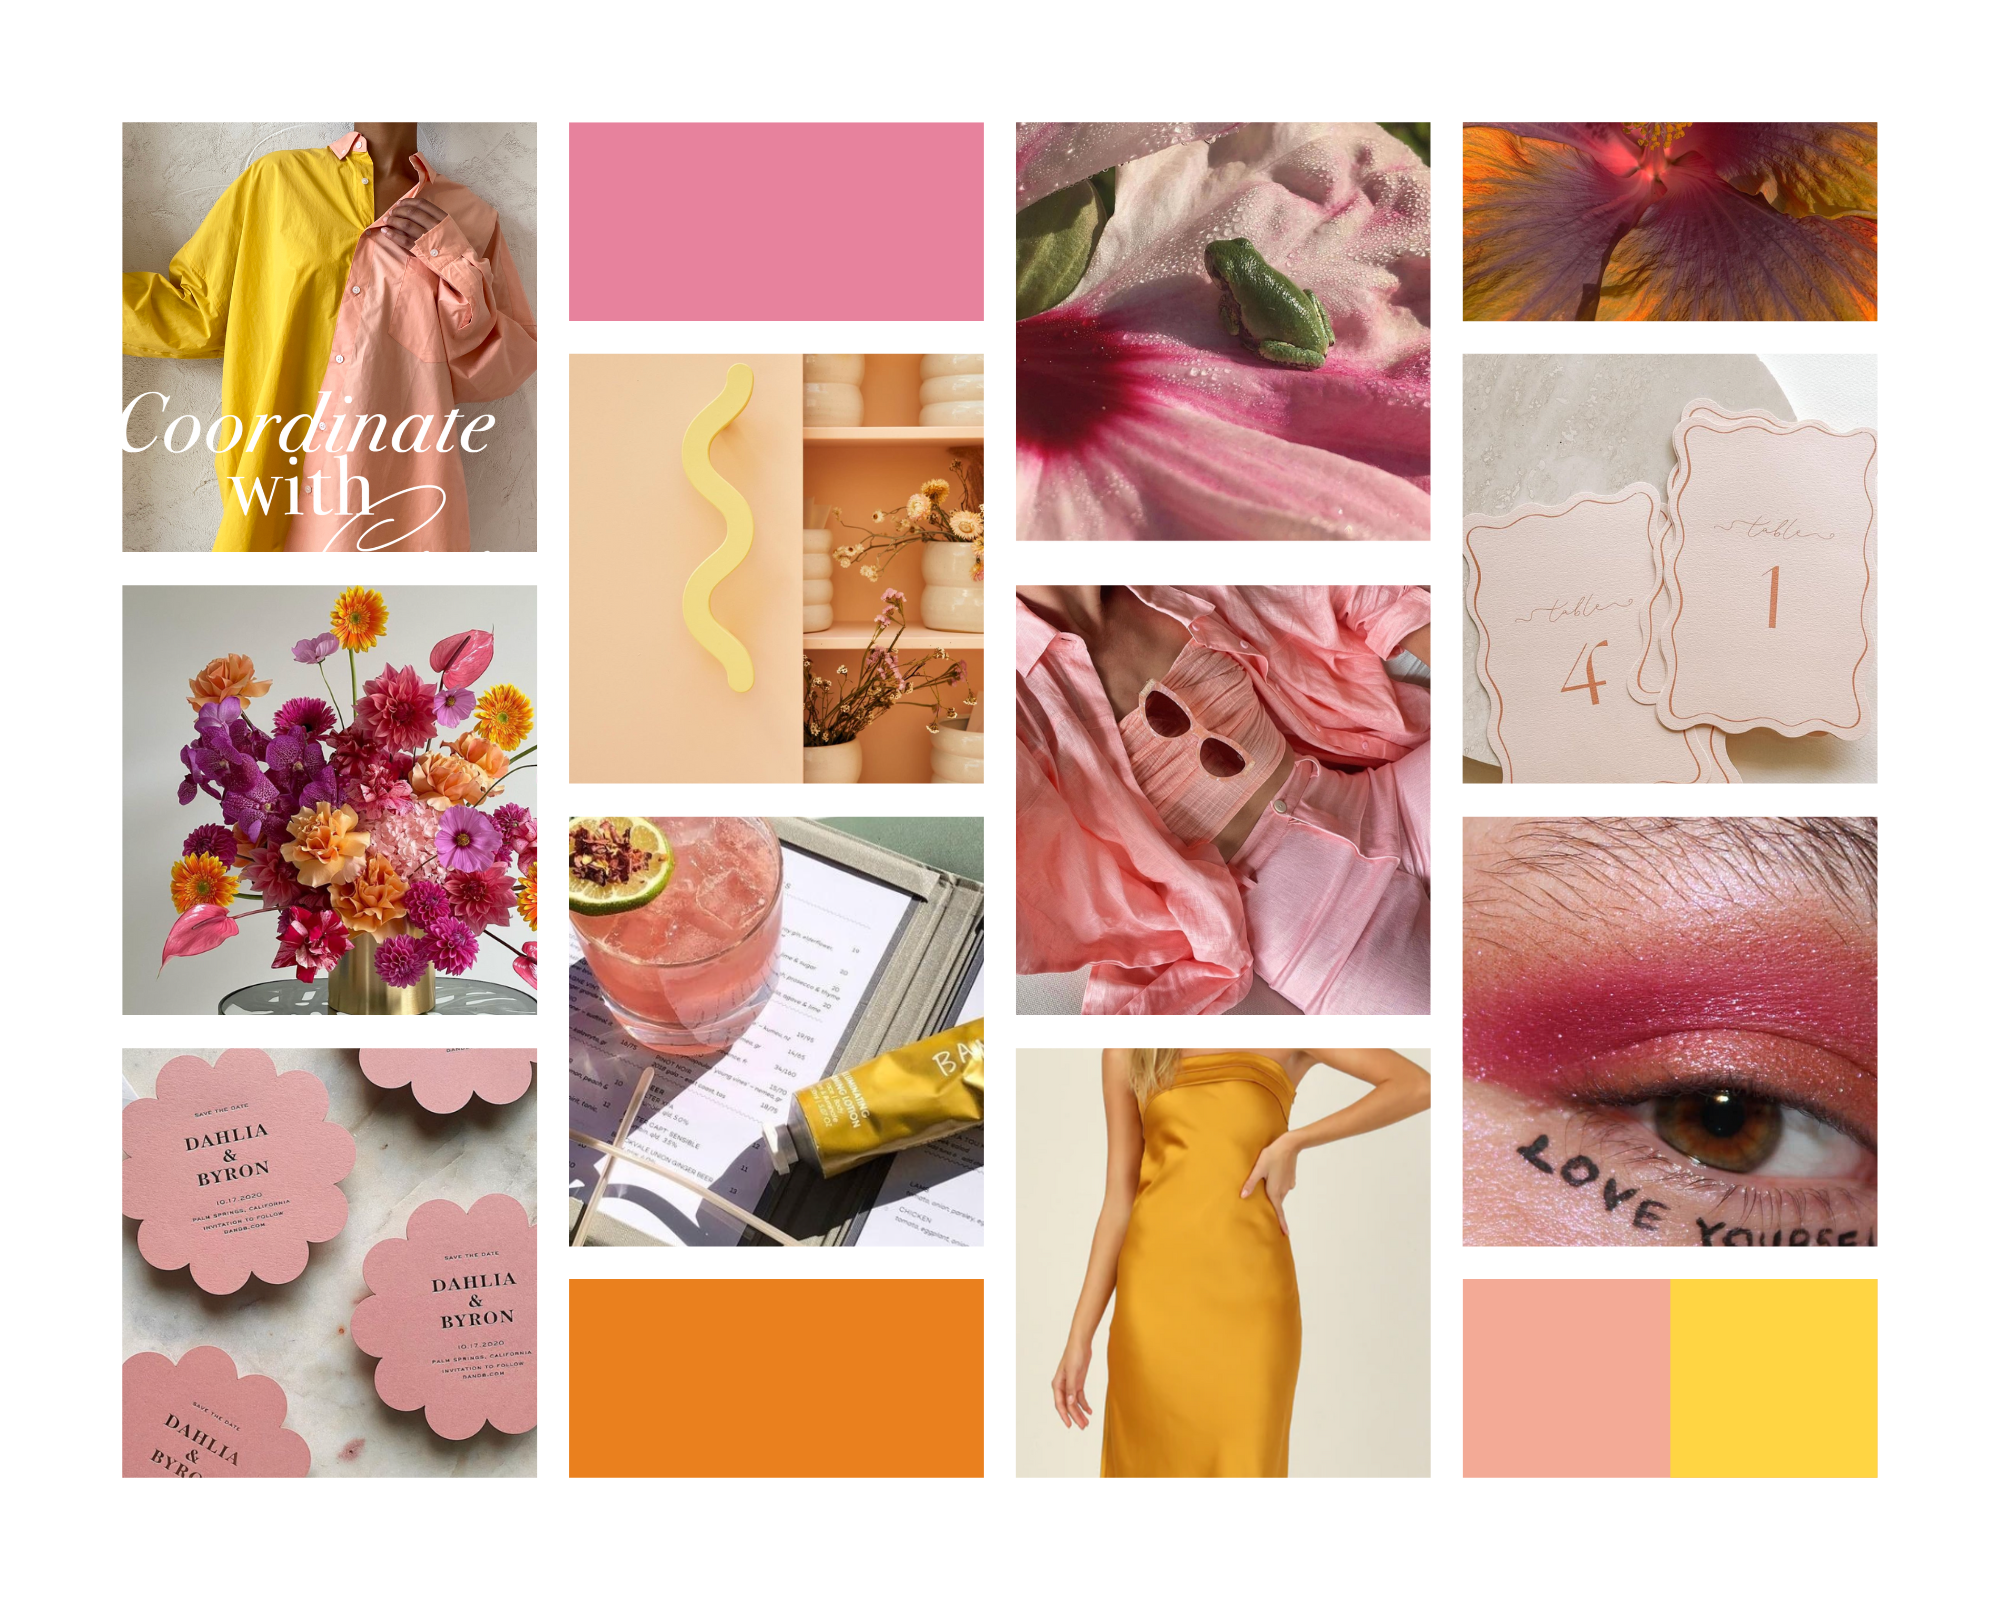 Stylist mood board showing various images of bright pinks, peaches, and yellow hues. Hot pink eyeshadow makeup, with popping radiant florals and wavy stationery.